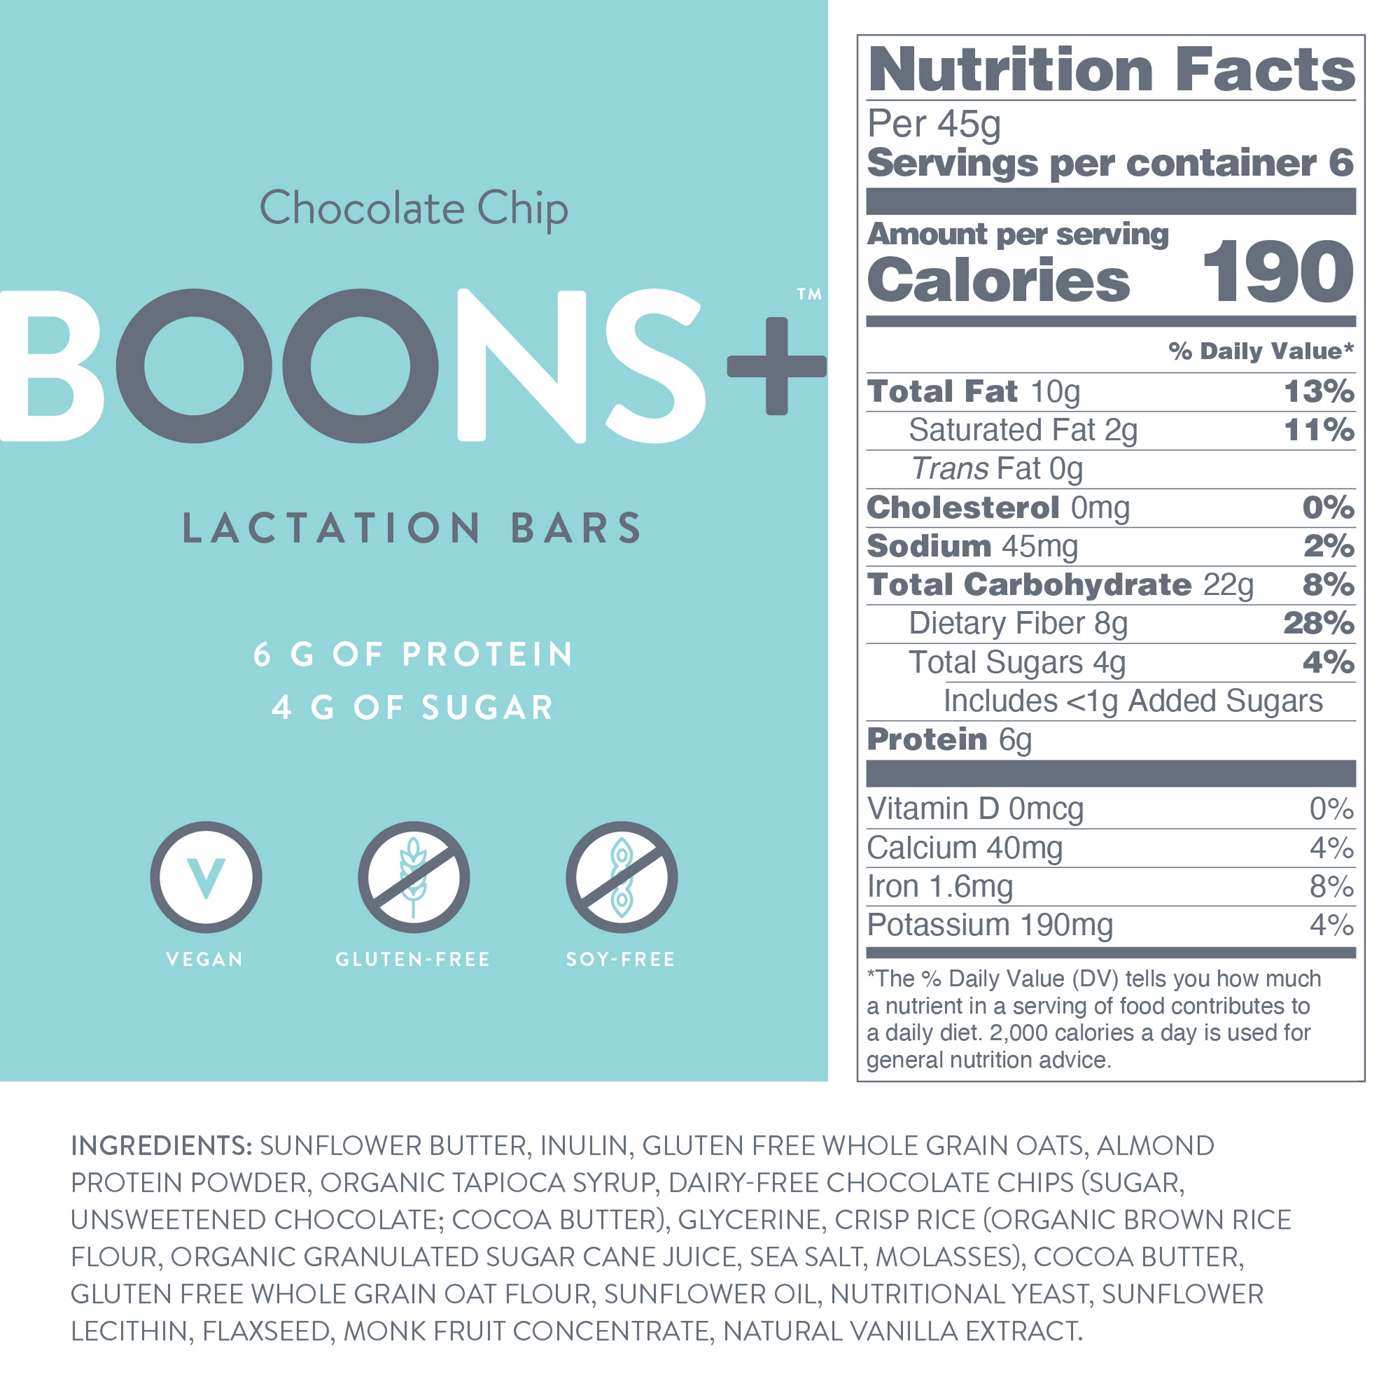 Boons + Lactation Bars Chocolate Chip; image 2 of 3